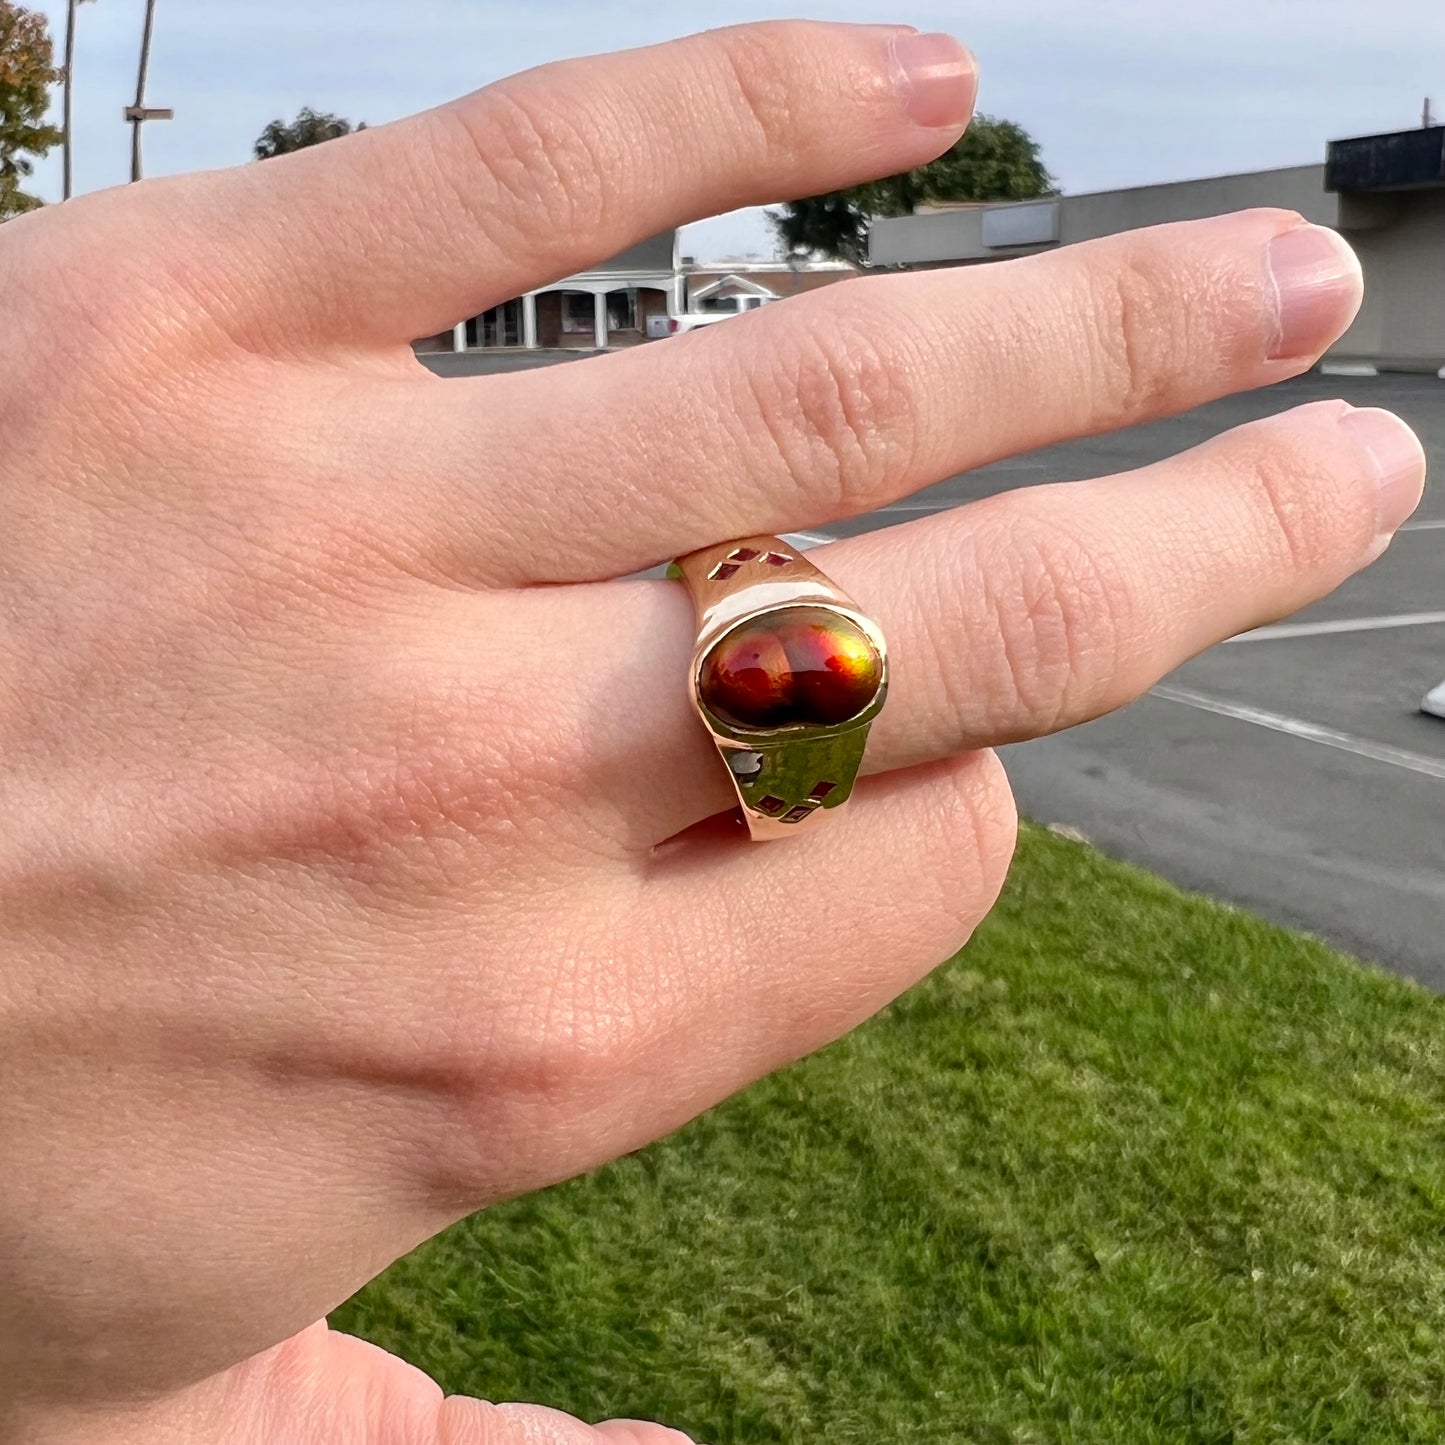 A yellow gold men's ring set with princess cut Burma rubies and a freeform cabochon cut red fire agate from Slaughter Mountain, Arizona.